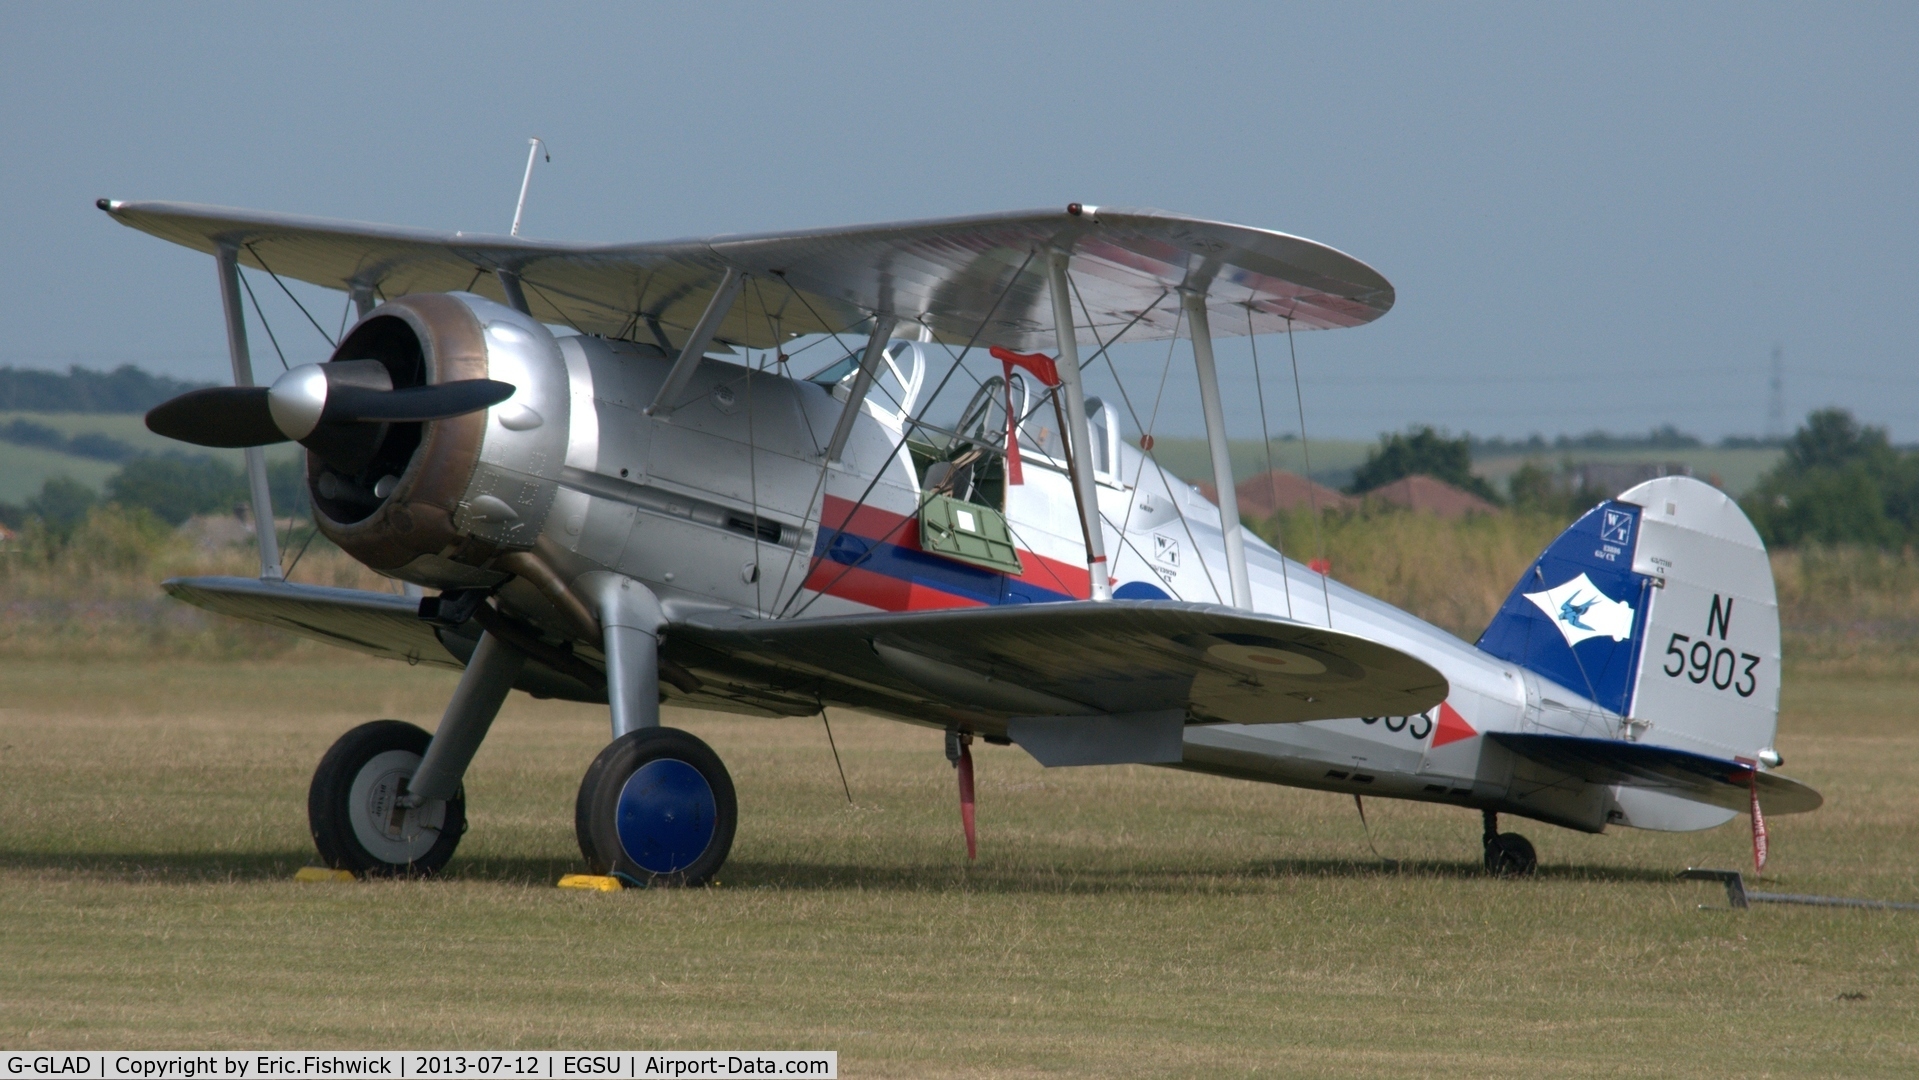 G-GLAD, 1939 Gloster Gladiator Mk2 C/N G5/75751, 3. N5903 on the eve of Flying Legends Air Show, Duxford - July 2013.